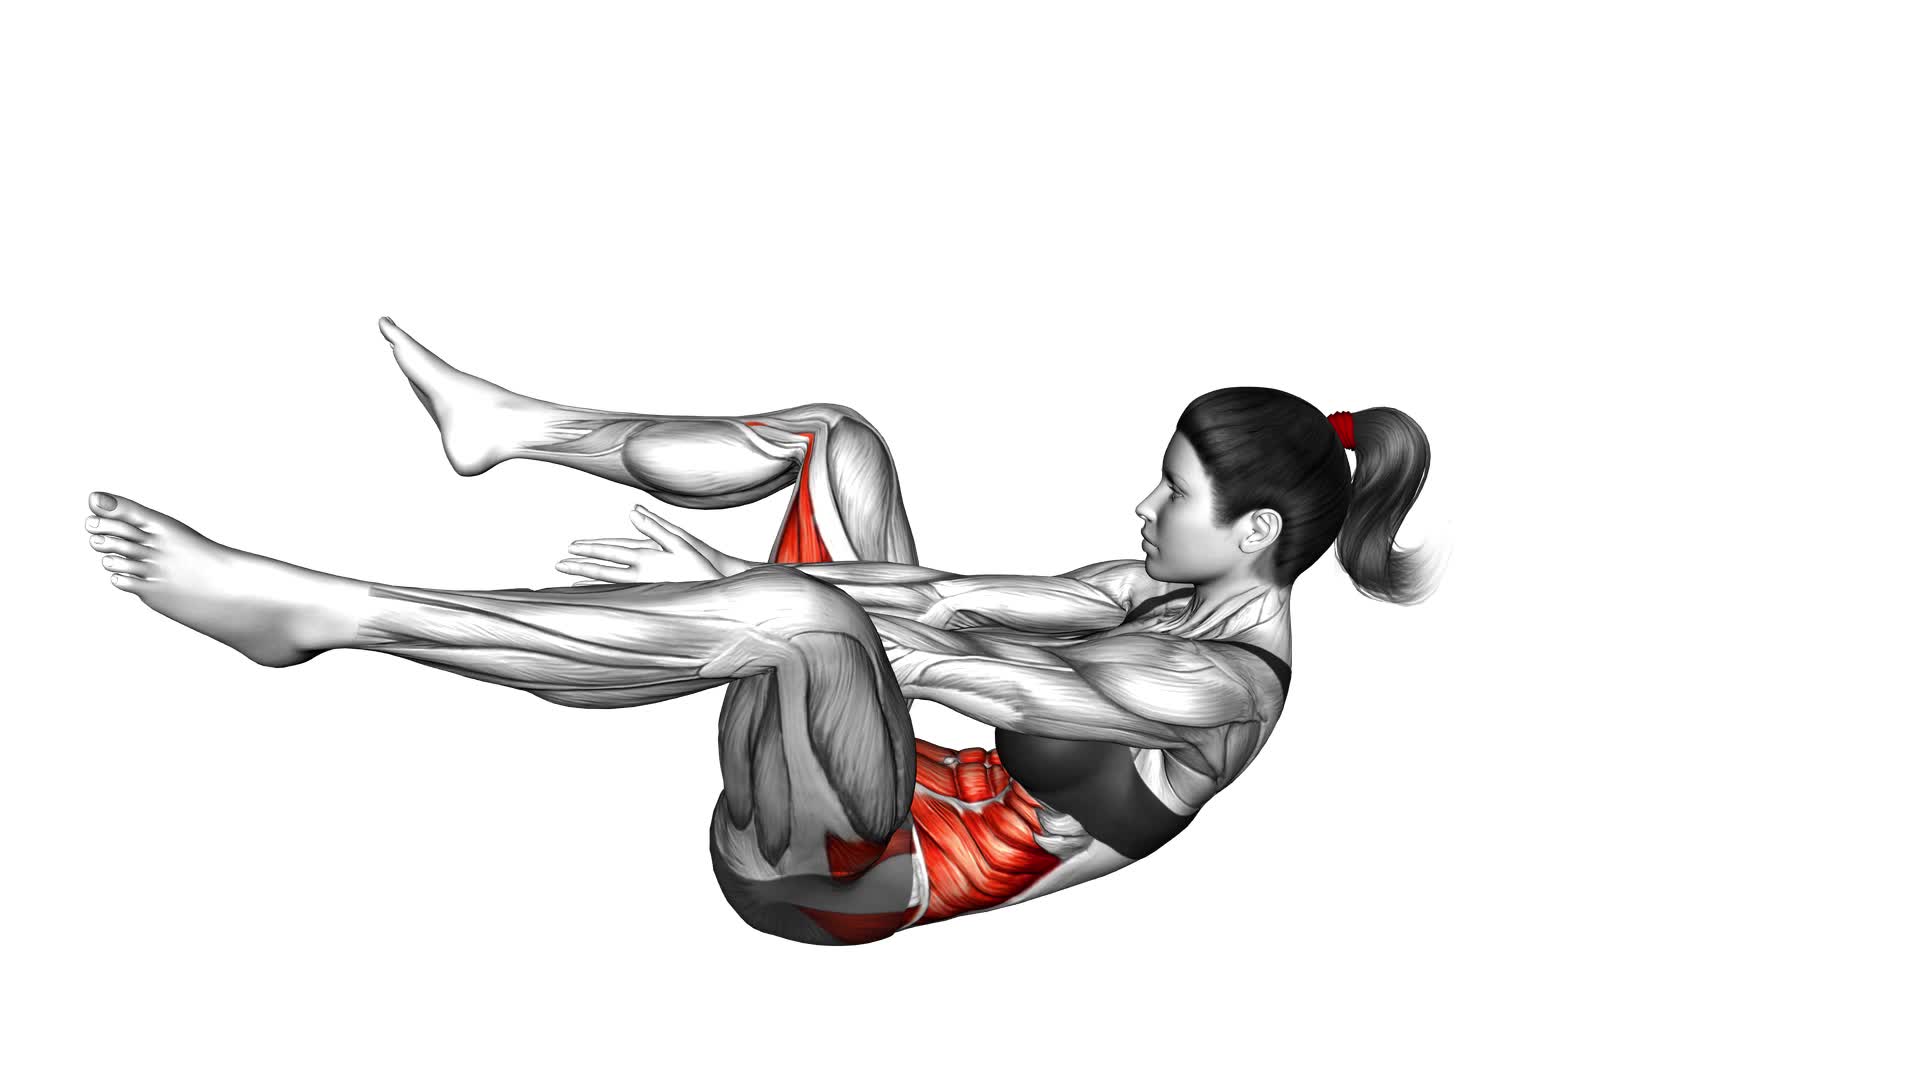 Bent Knee Abduction Crunch With Arms Through (Female) - Video Exercise Guide & Tips